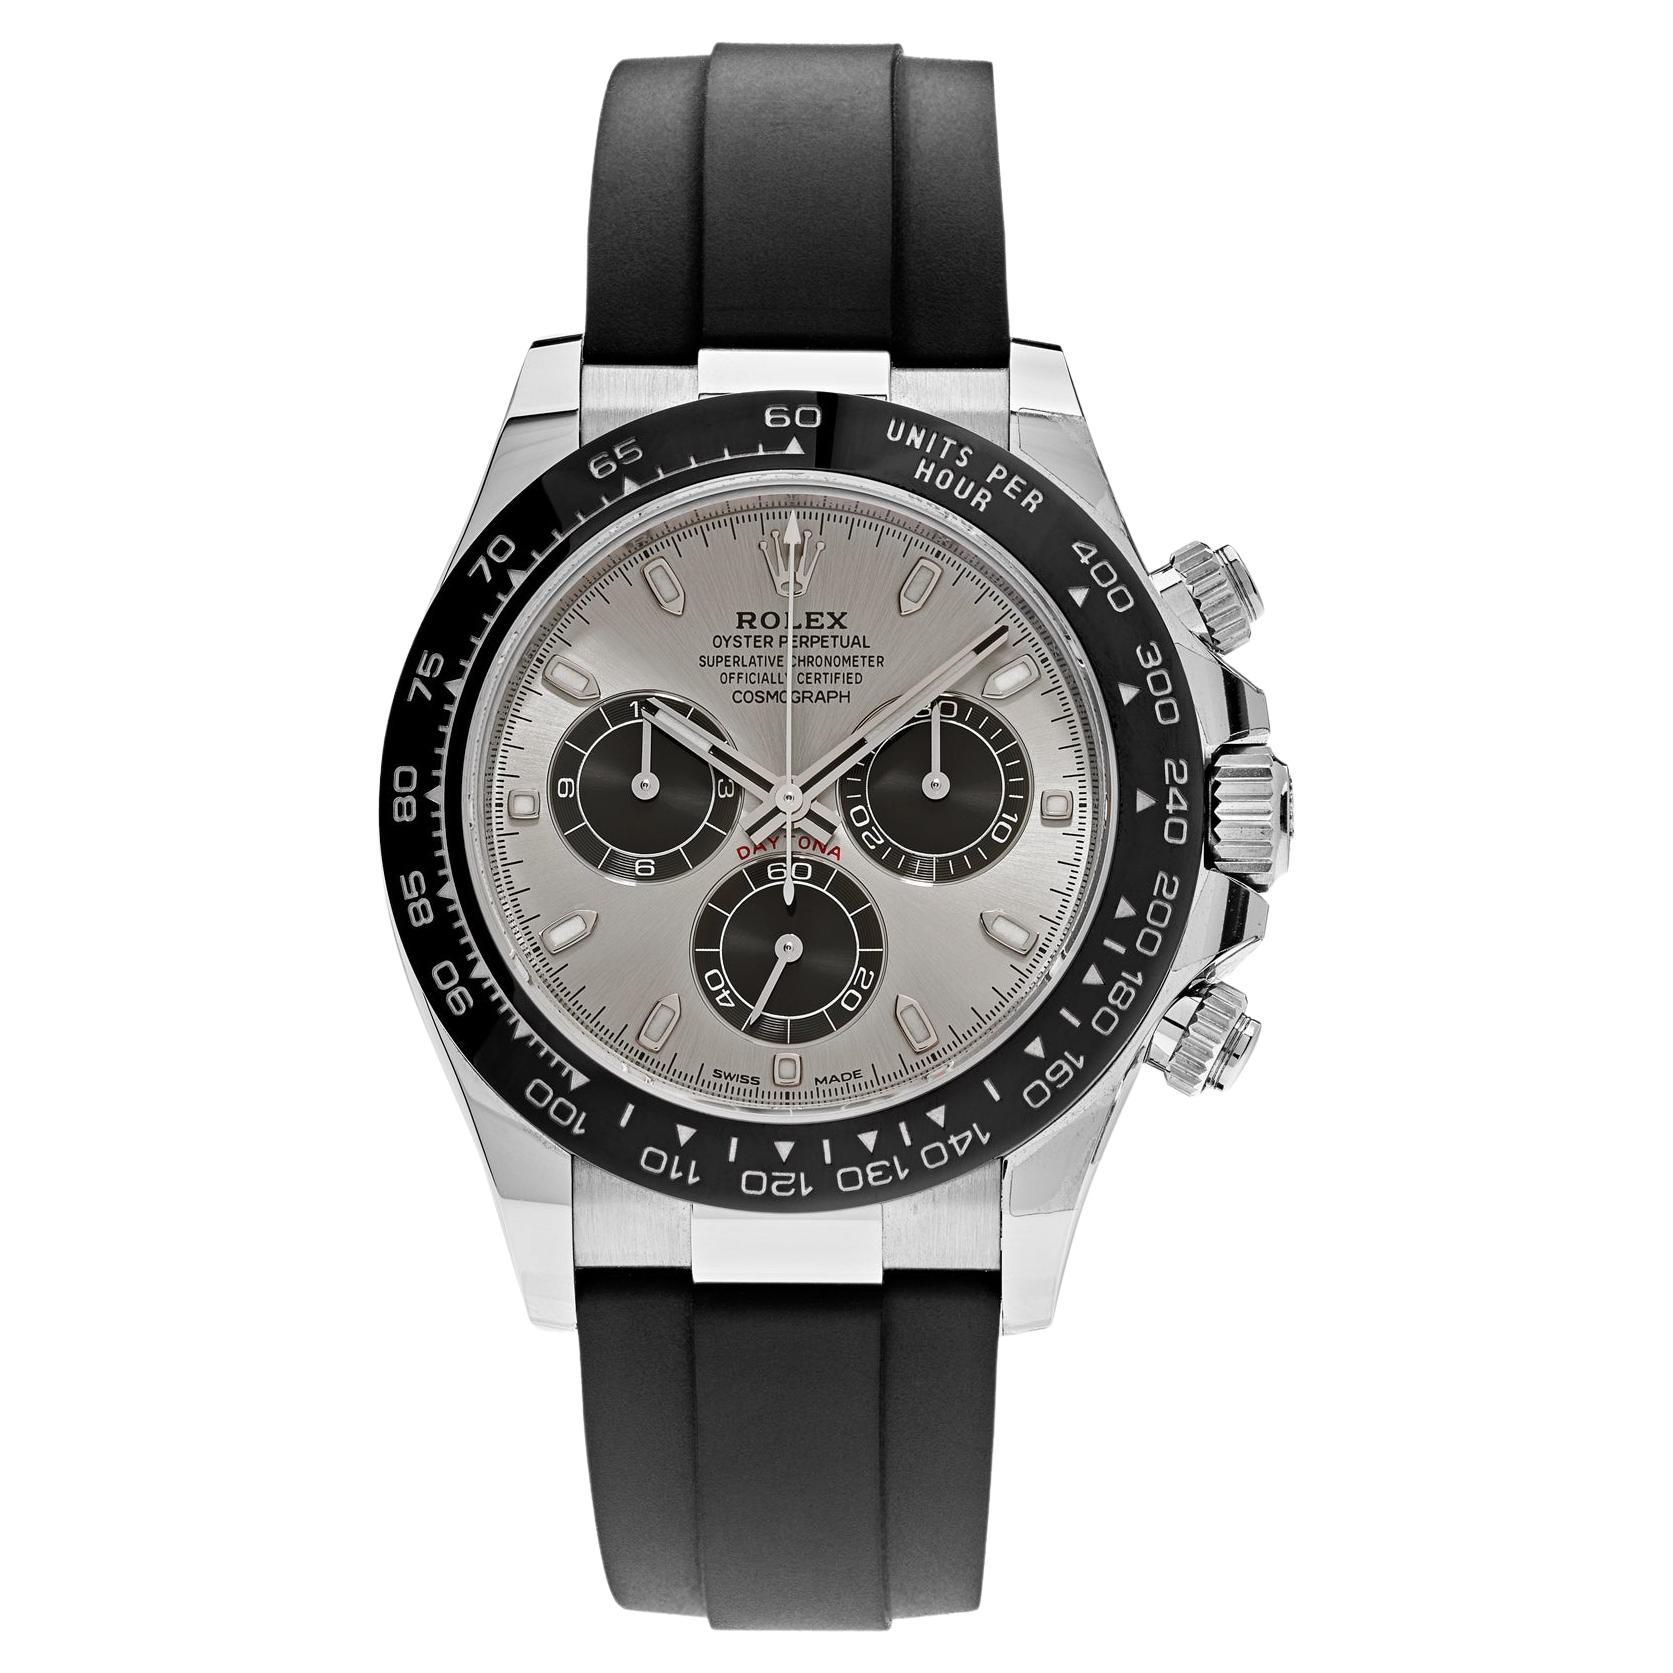 Rolex Daytona White Gold Steel and Black Dial 116519LN, '2022' For Sale at  1stDibs | 116519ln for sale, rolex daytona white gold oysterflex